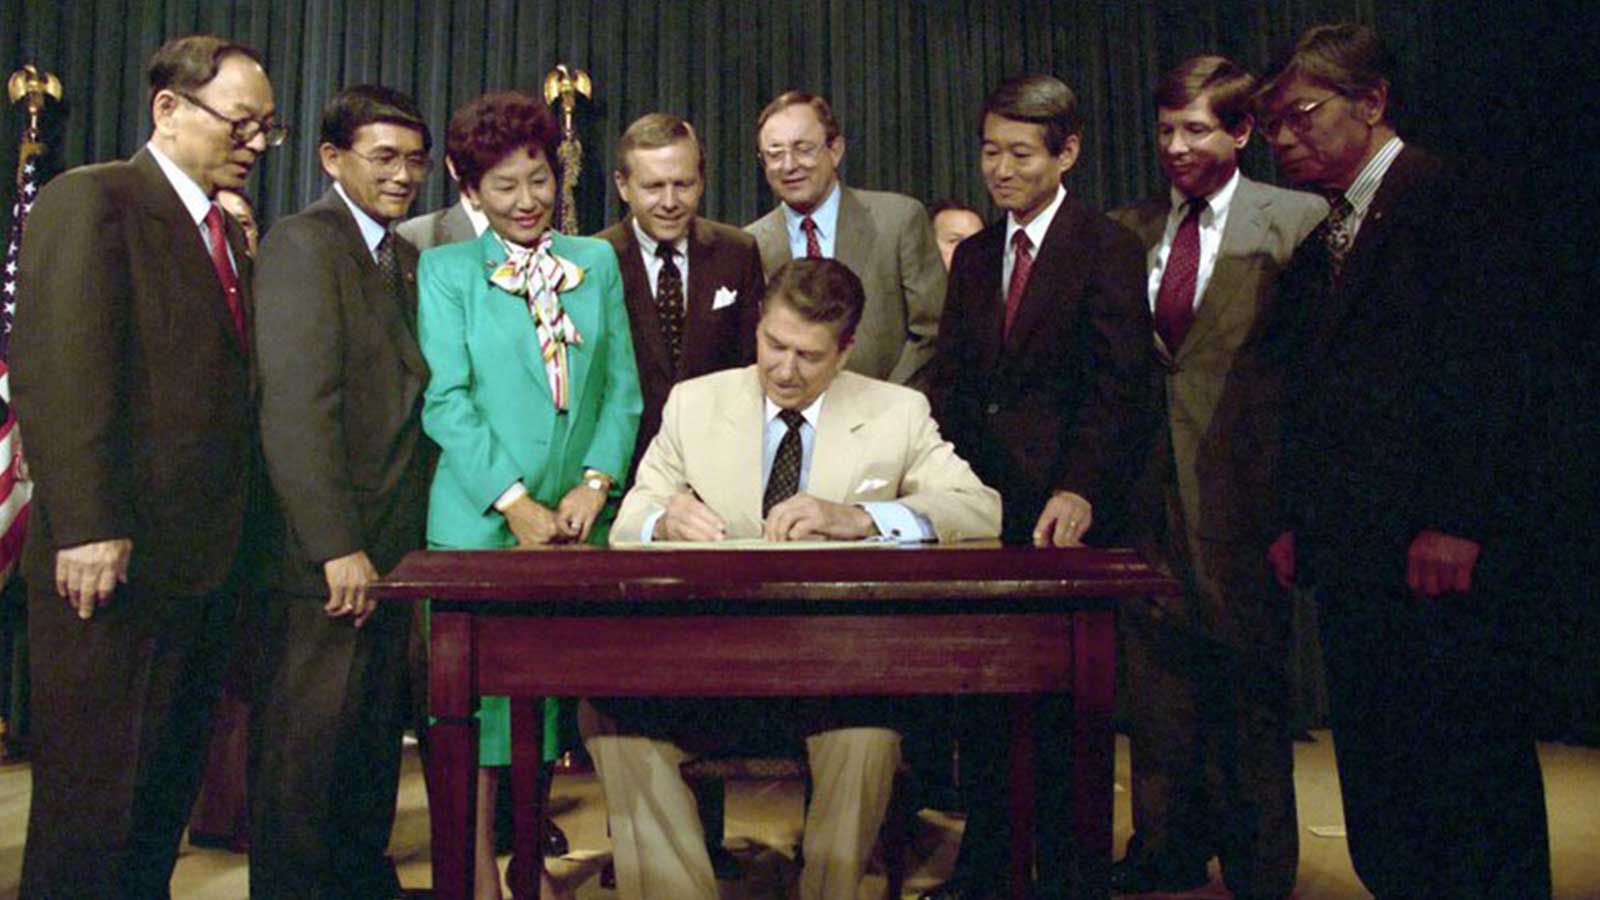 President Reagan signing a reparations bill in 1987 for Japanese-Americans interned during World War Two